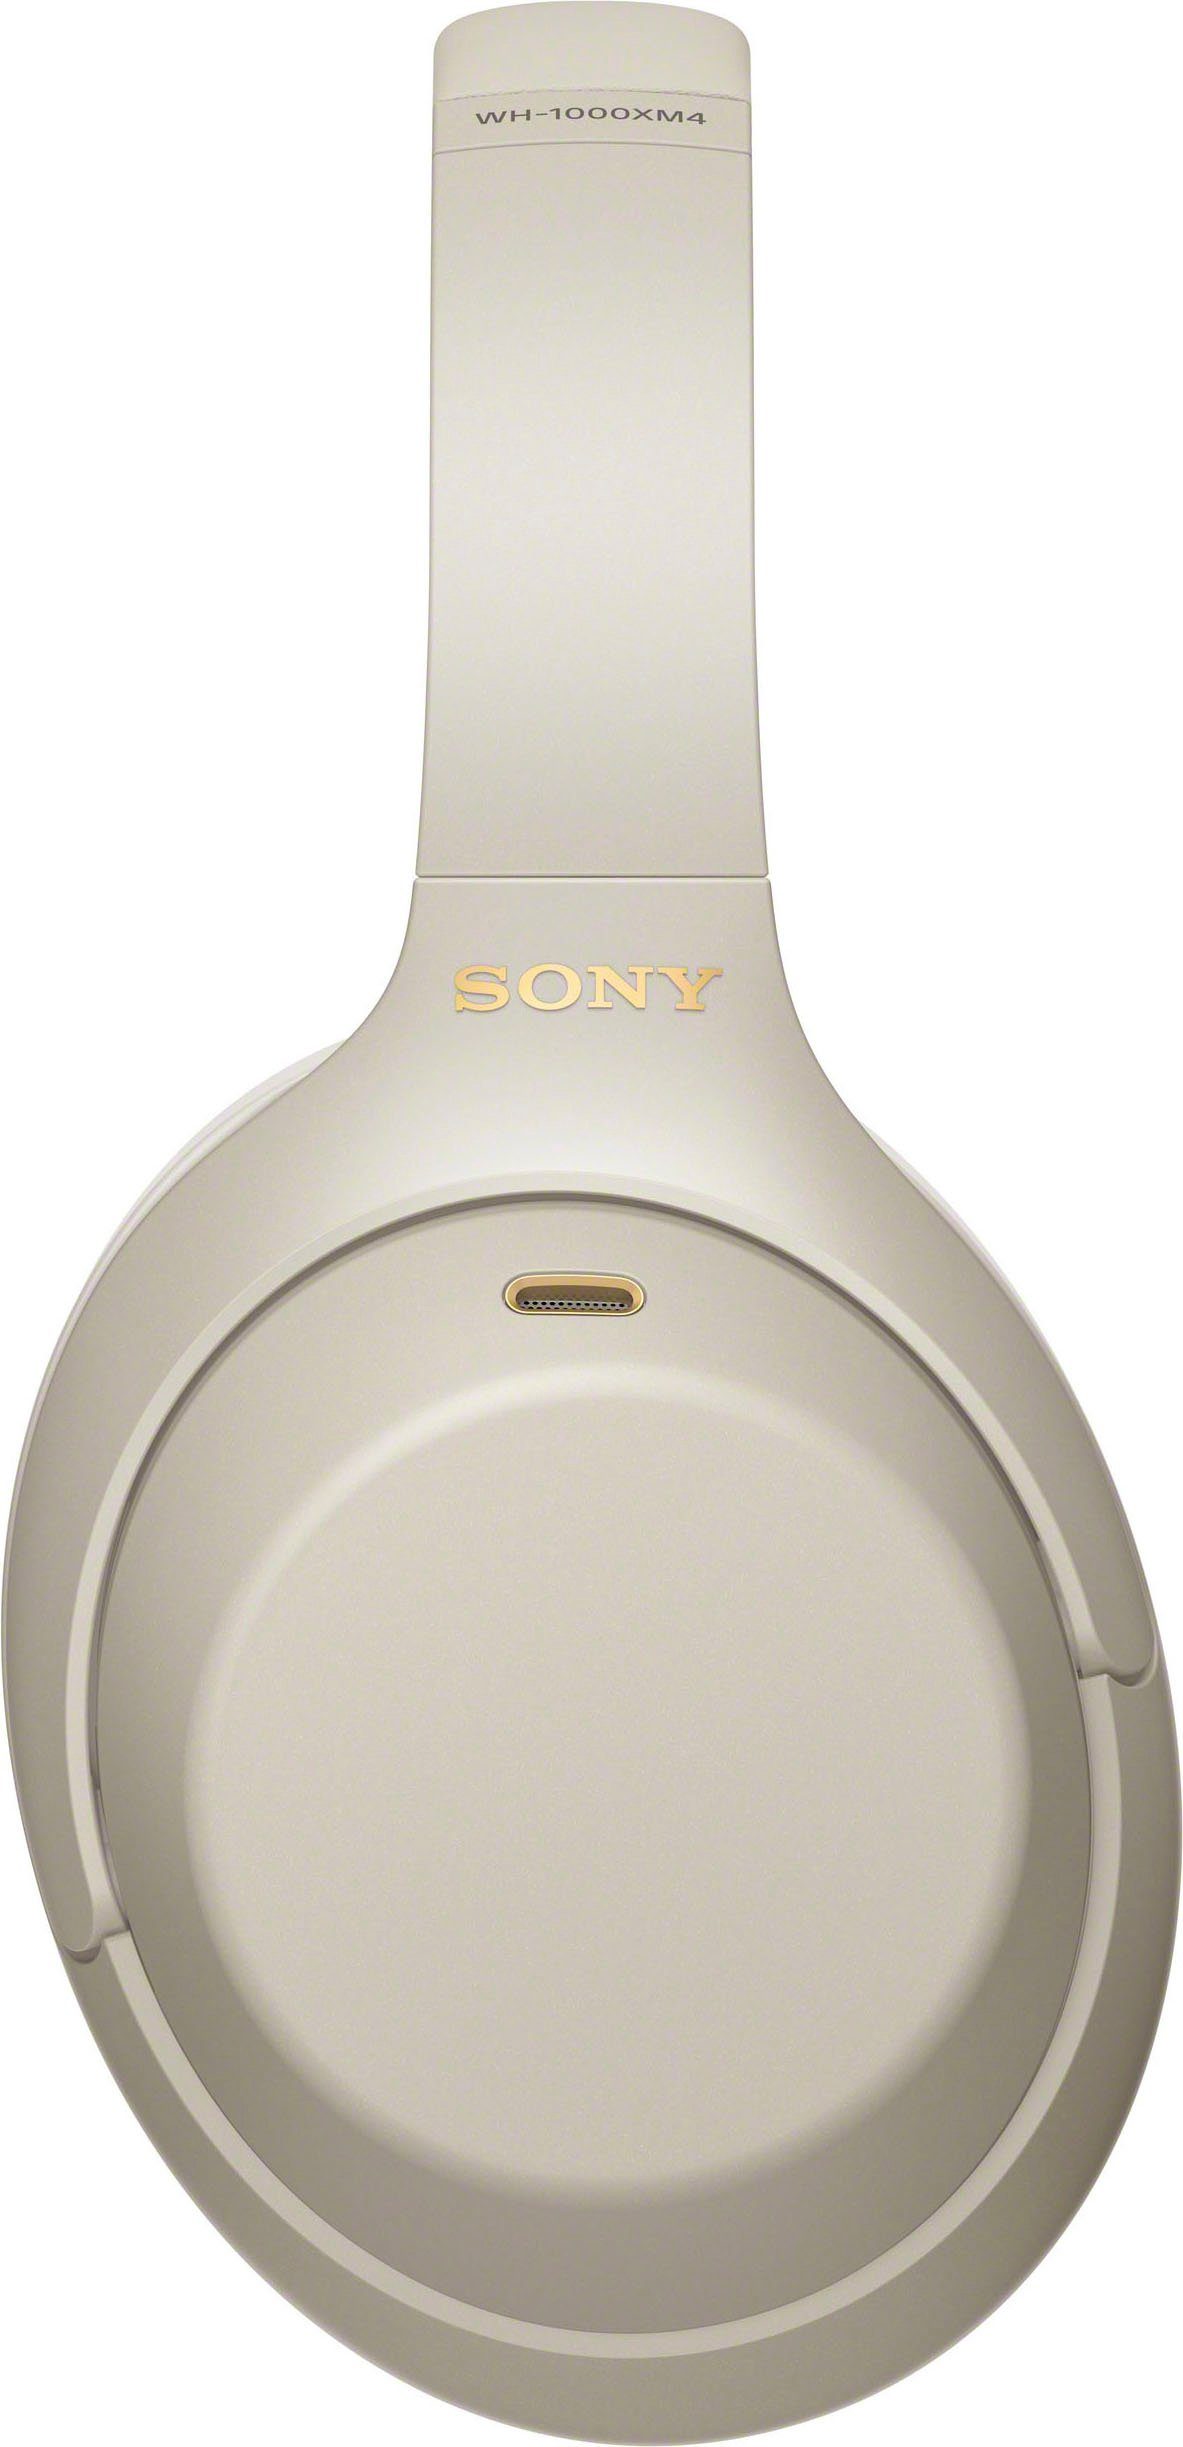 Sony WH-1000XM4 Over-Ear-Kopfhörer via Touch Bluetooth, Silber Verbindung Schnellladefunktion) One-Touch Sensor, kabelloser NFC, NFC, (Noise-Cancelling